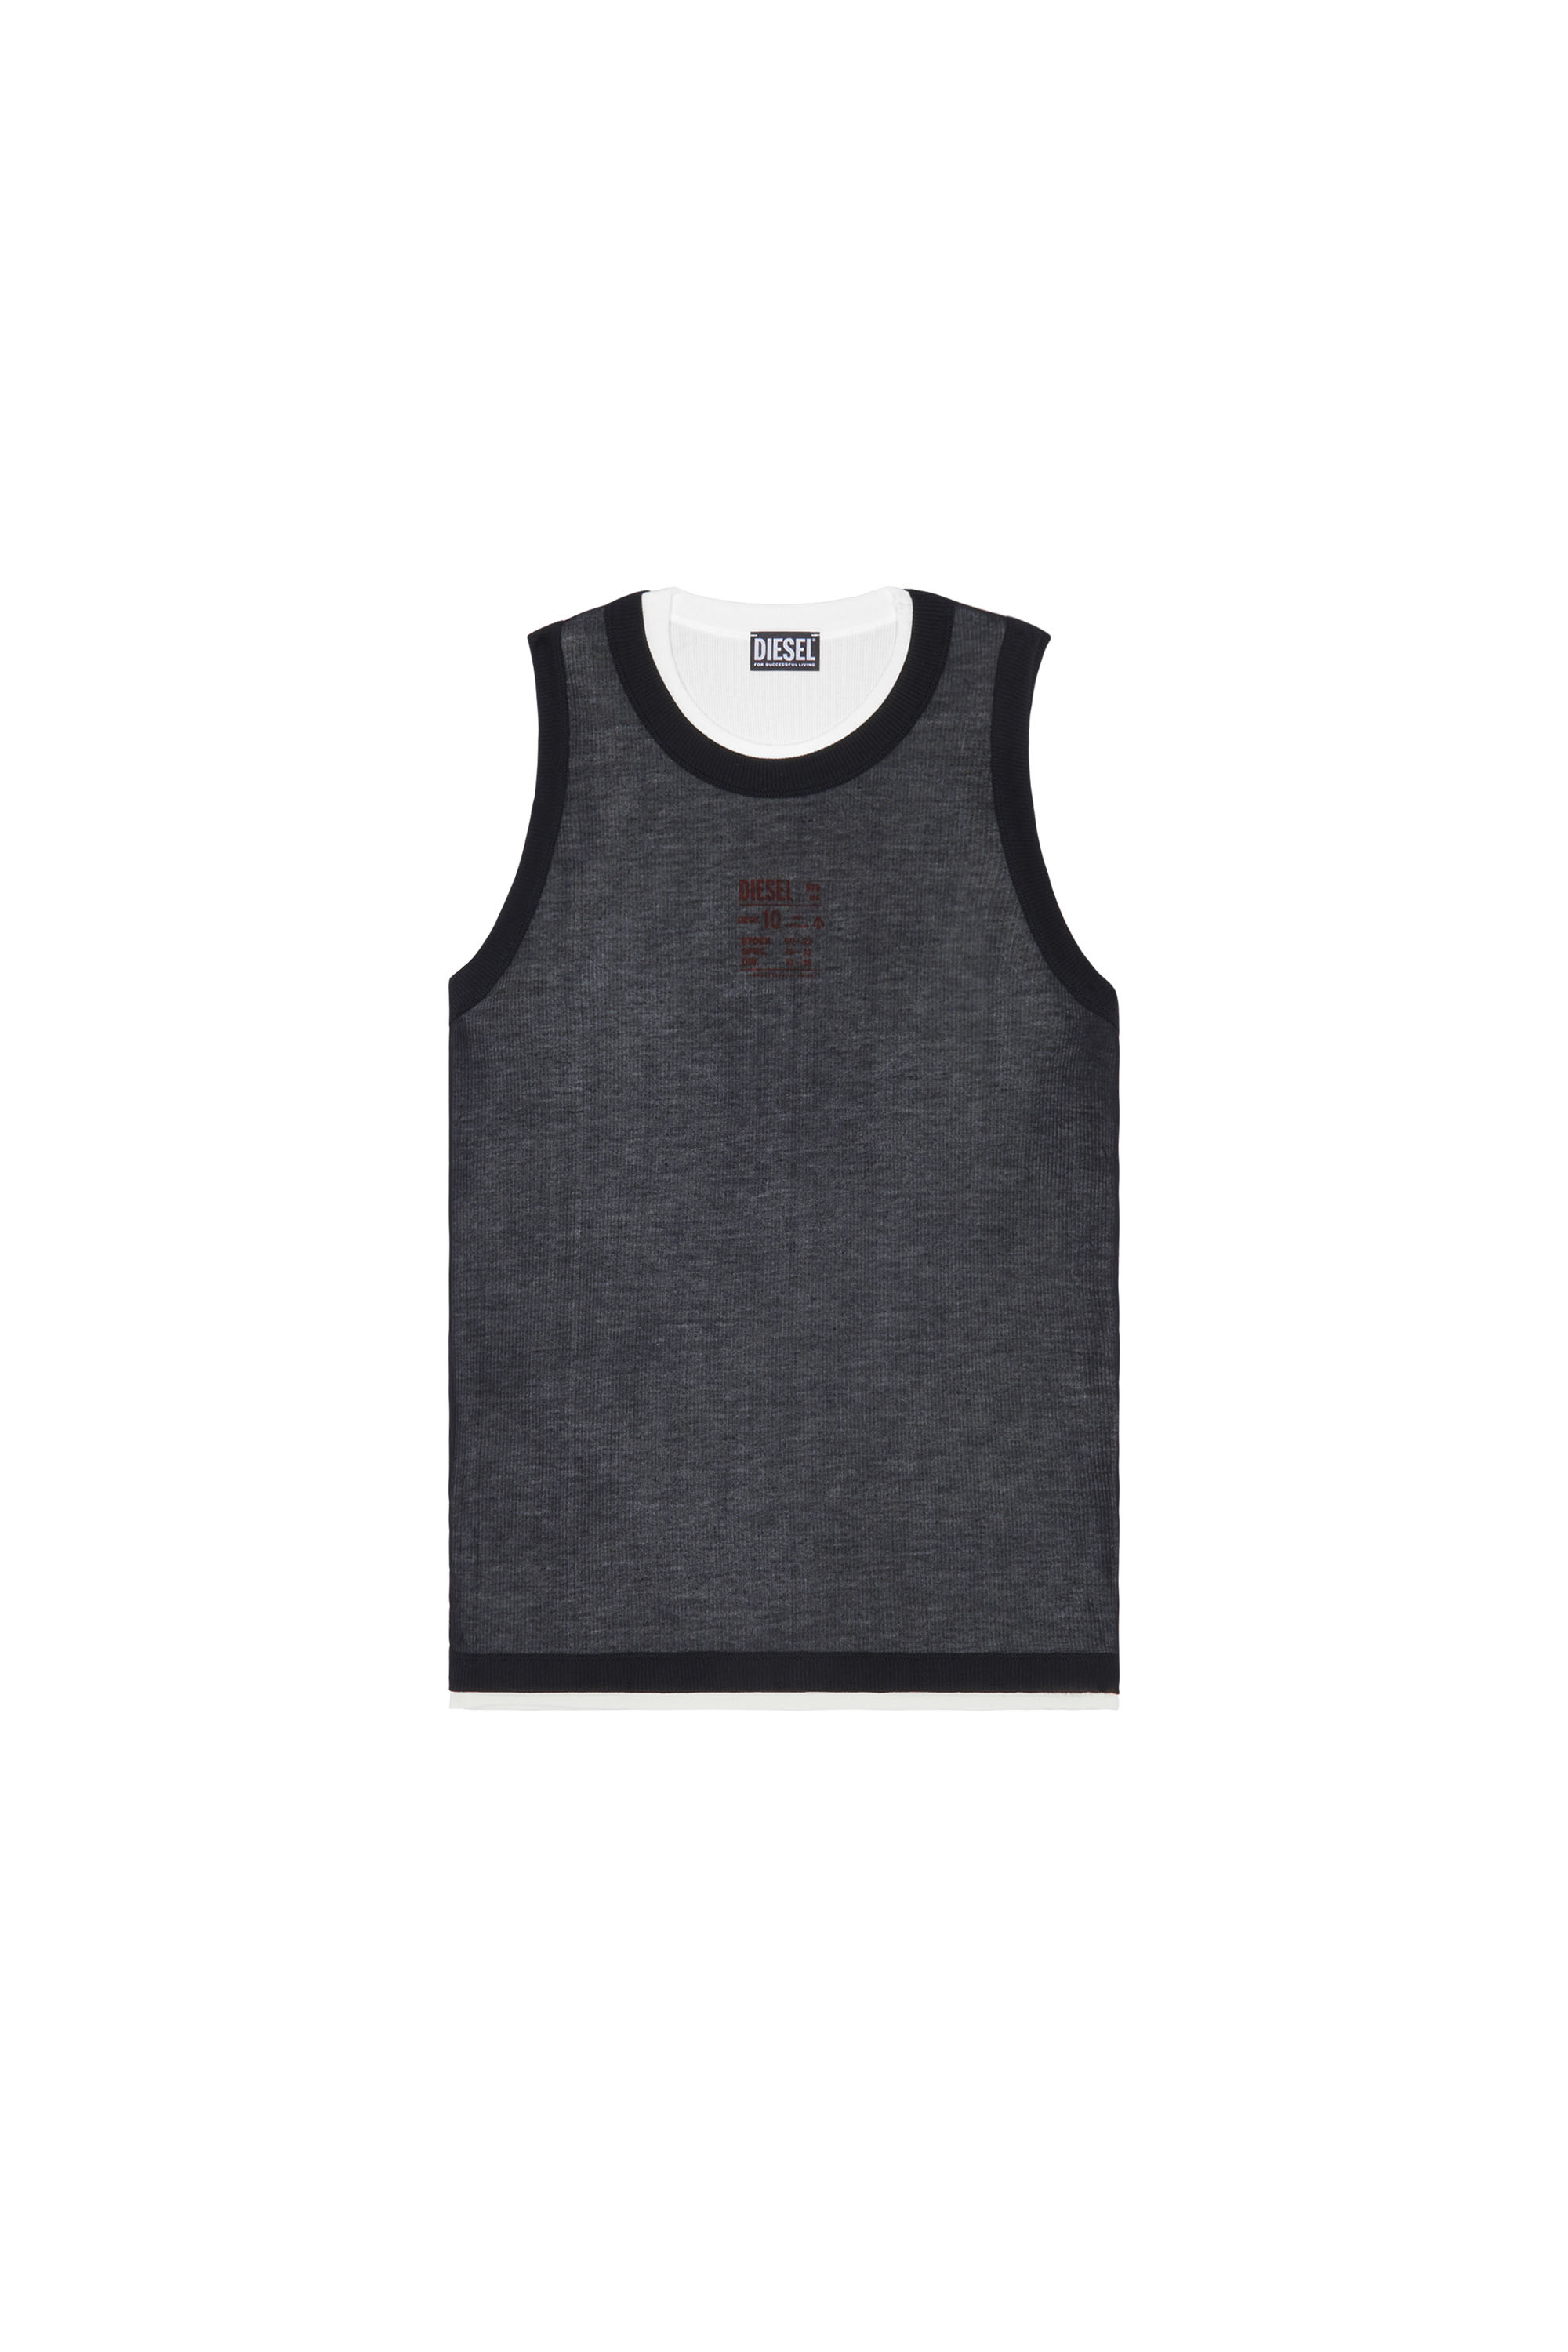 Diesel - T-DOUBLY, Black - Image 1